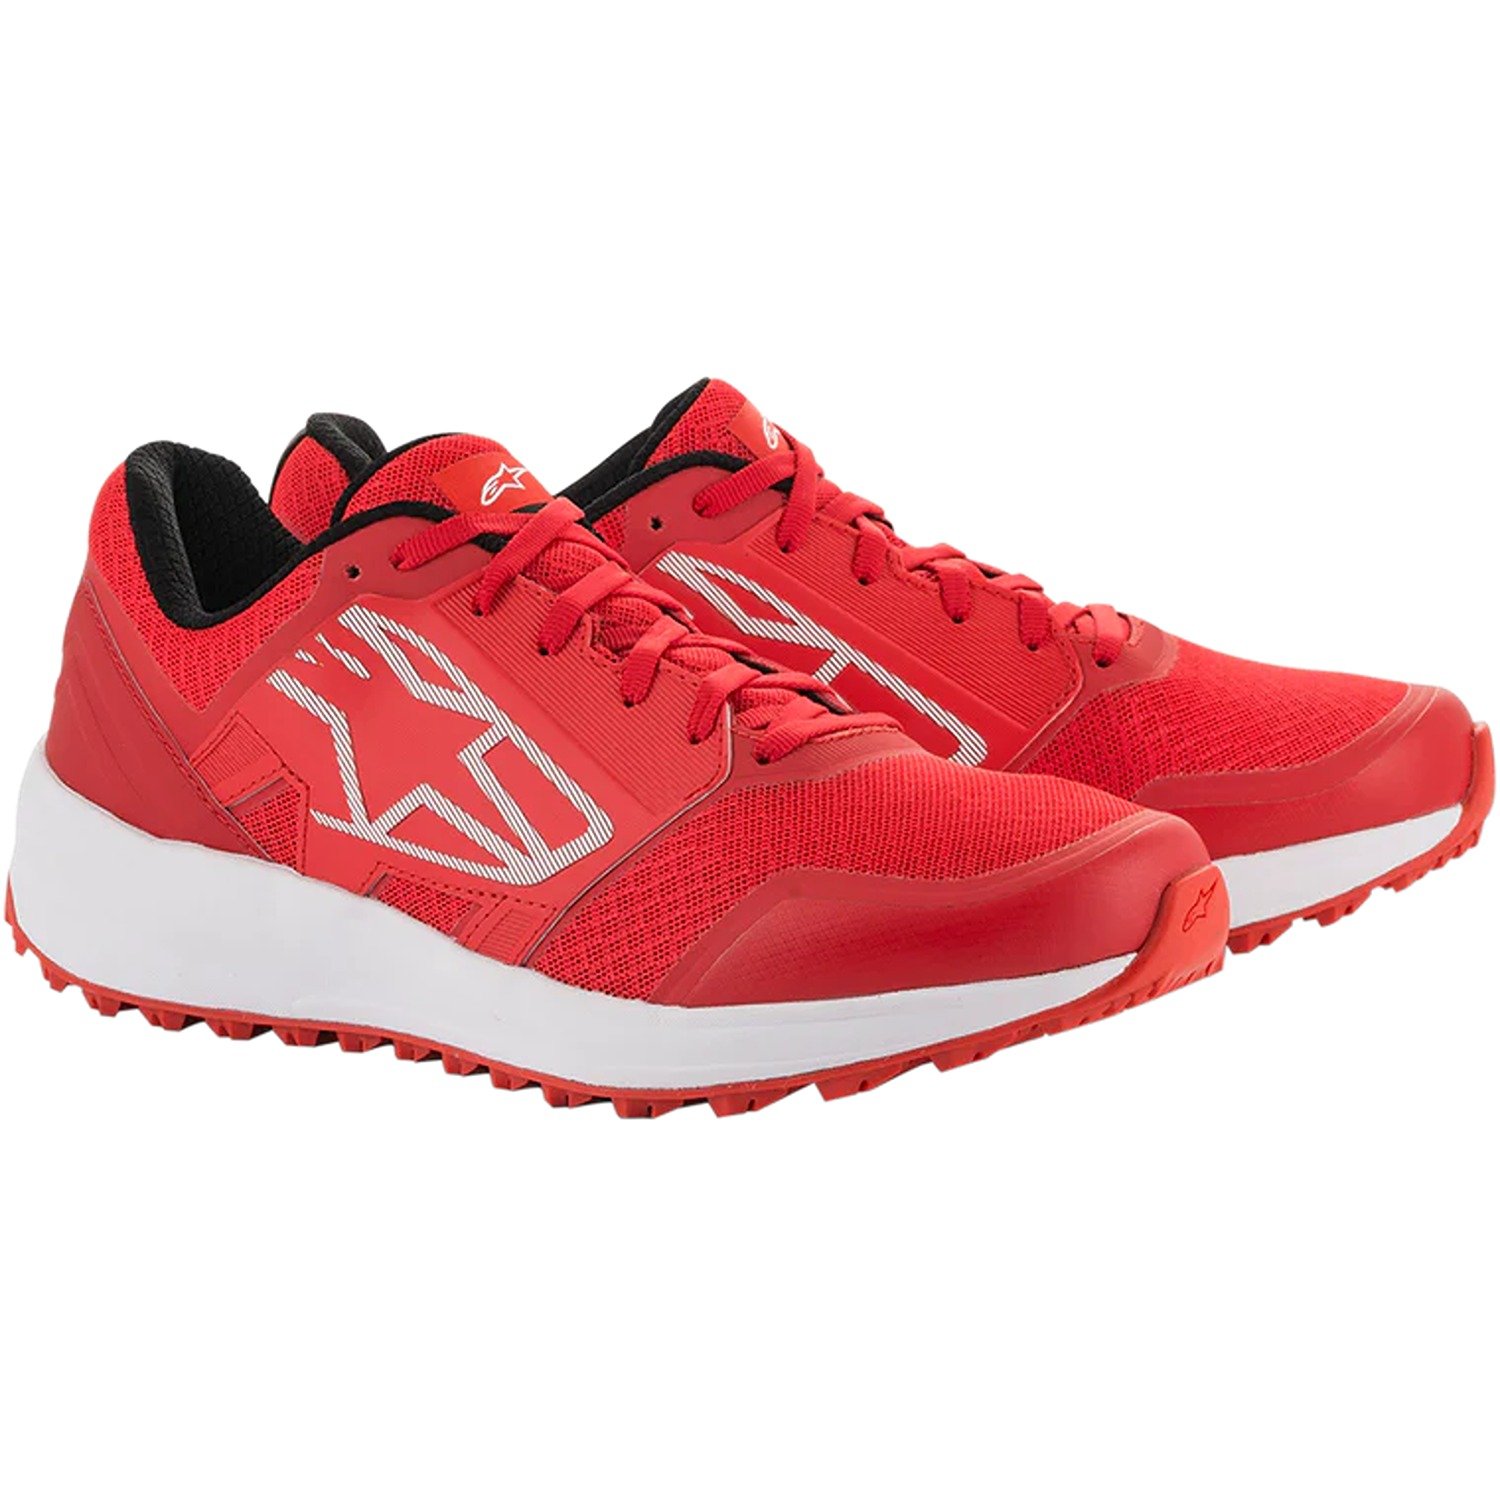 Image of EU Alpinestars Meta Trail Shoes Red White Taille US 9